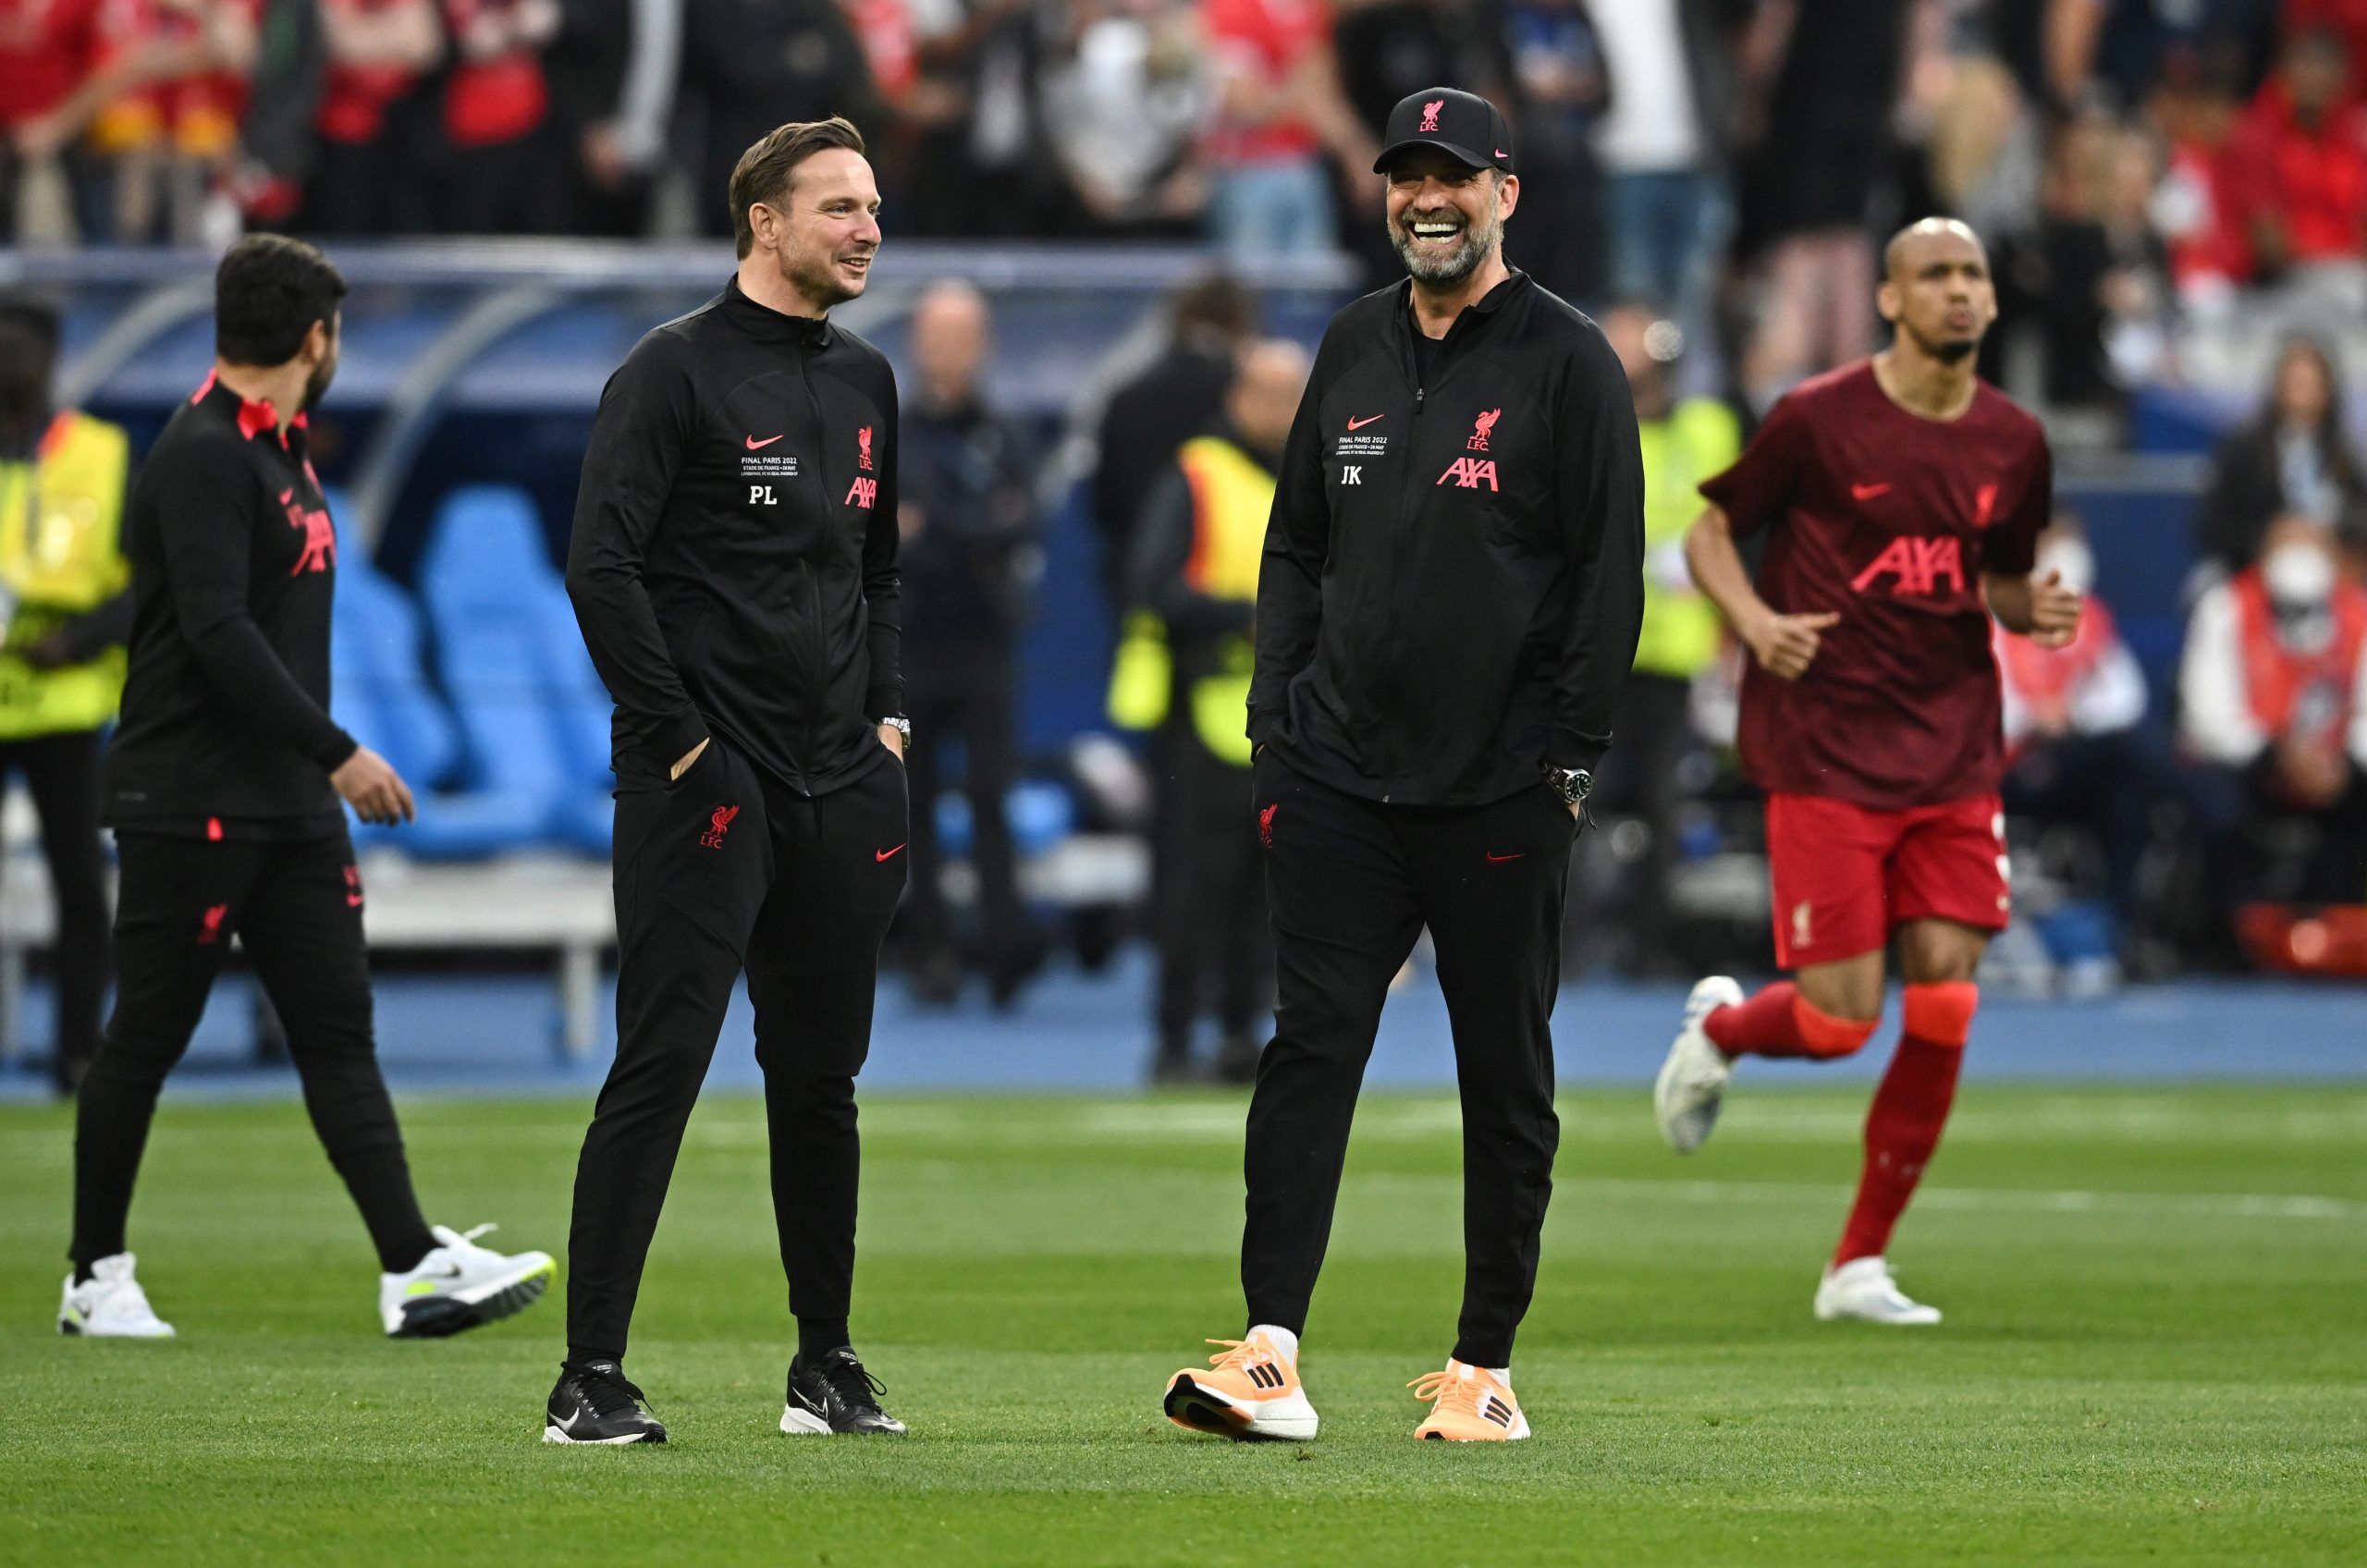 Soccer Football - Champions League Final - Liverpool v Real Madrid - Stade de France, Saint-Denis near Paris, France - May 28, 2022 Liverpool manager Juergen Klopp and assistant manager Pep Lijnders before the match REUTERS/Dylan Martinez